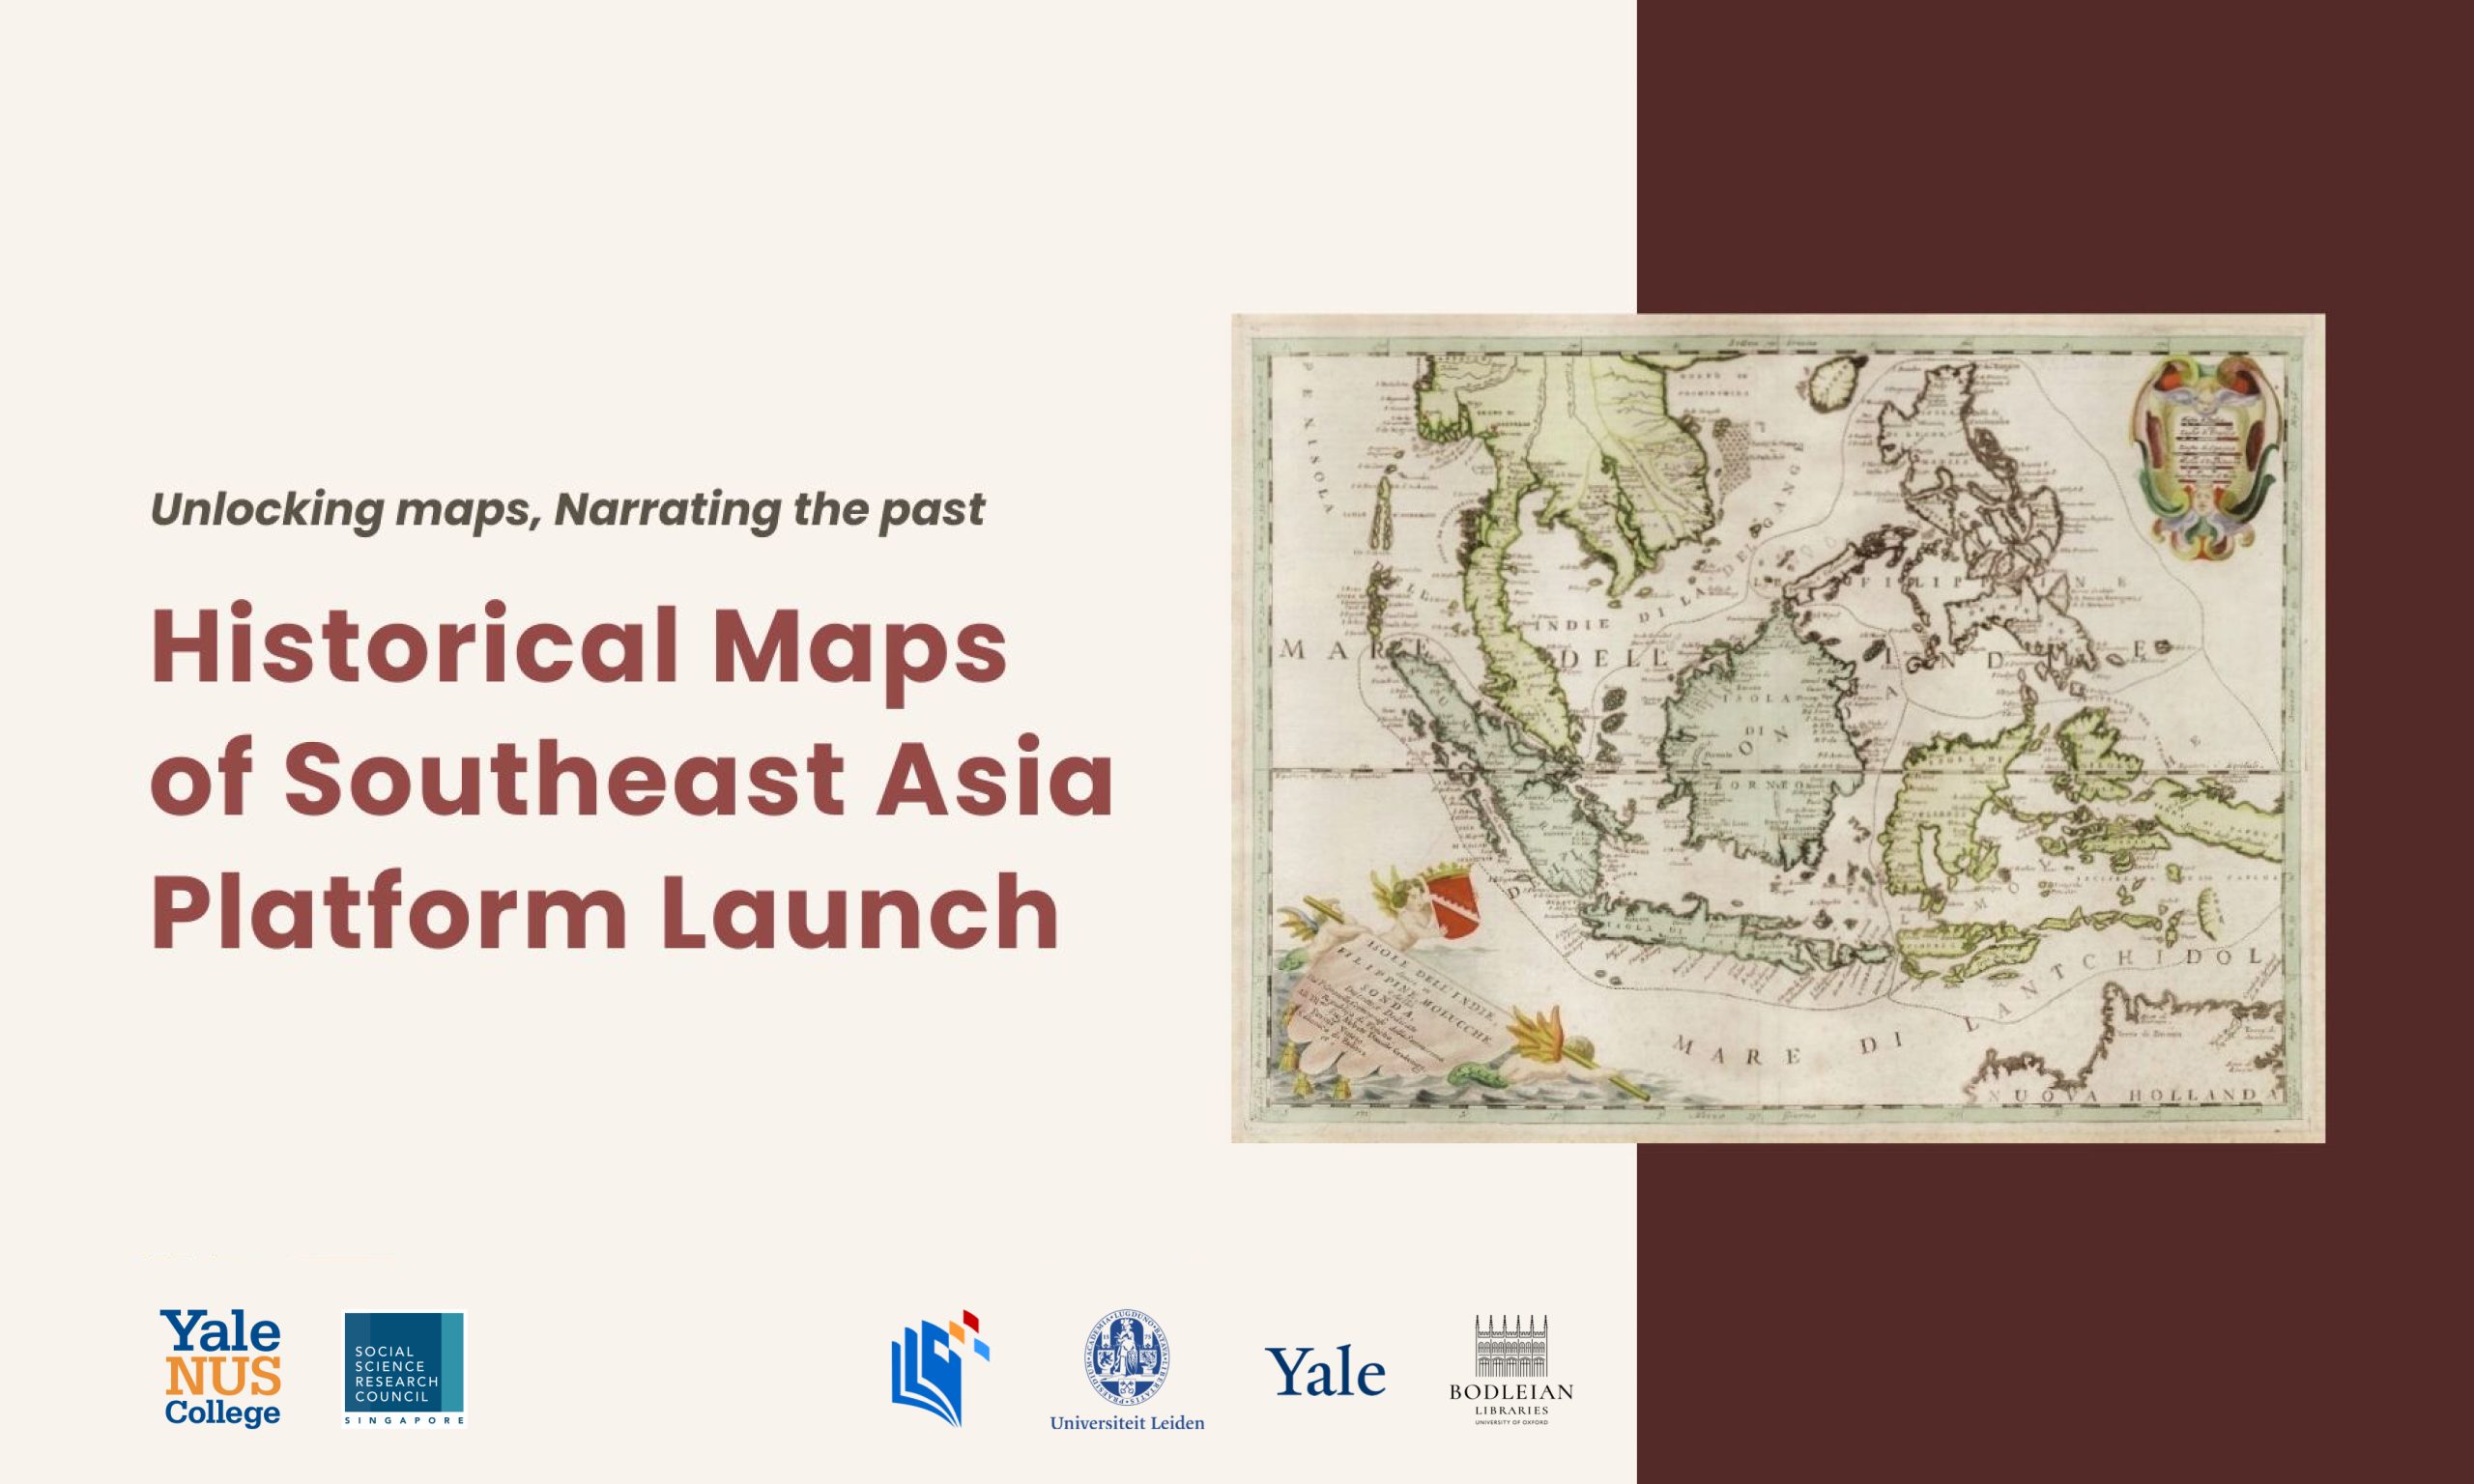 Unlocking maps, Narrating the past: Historical Maps of Southeast Asia Platform Launch